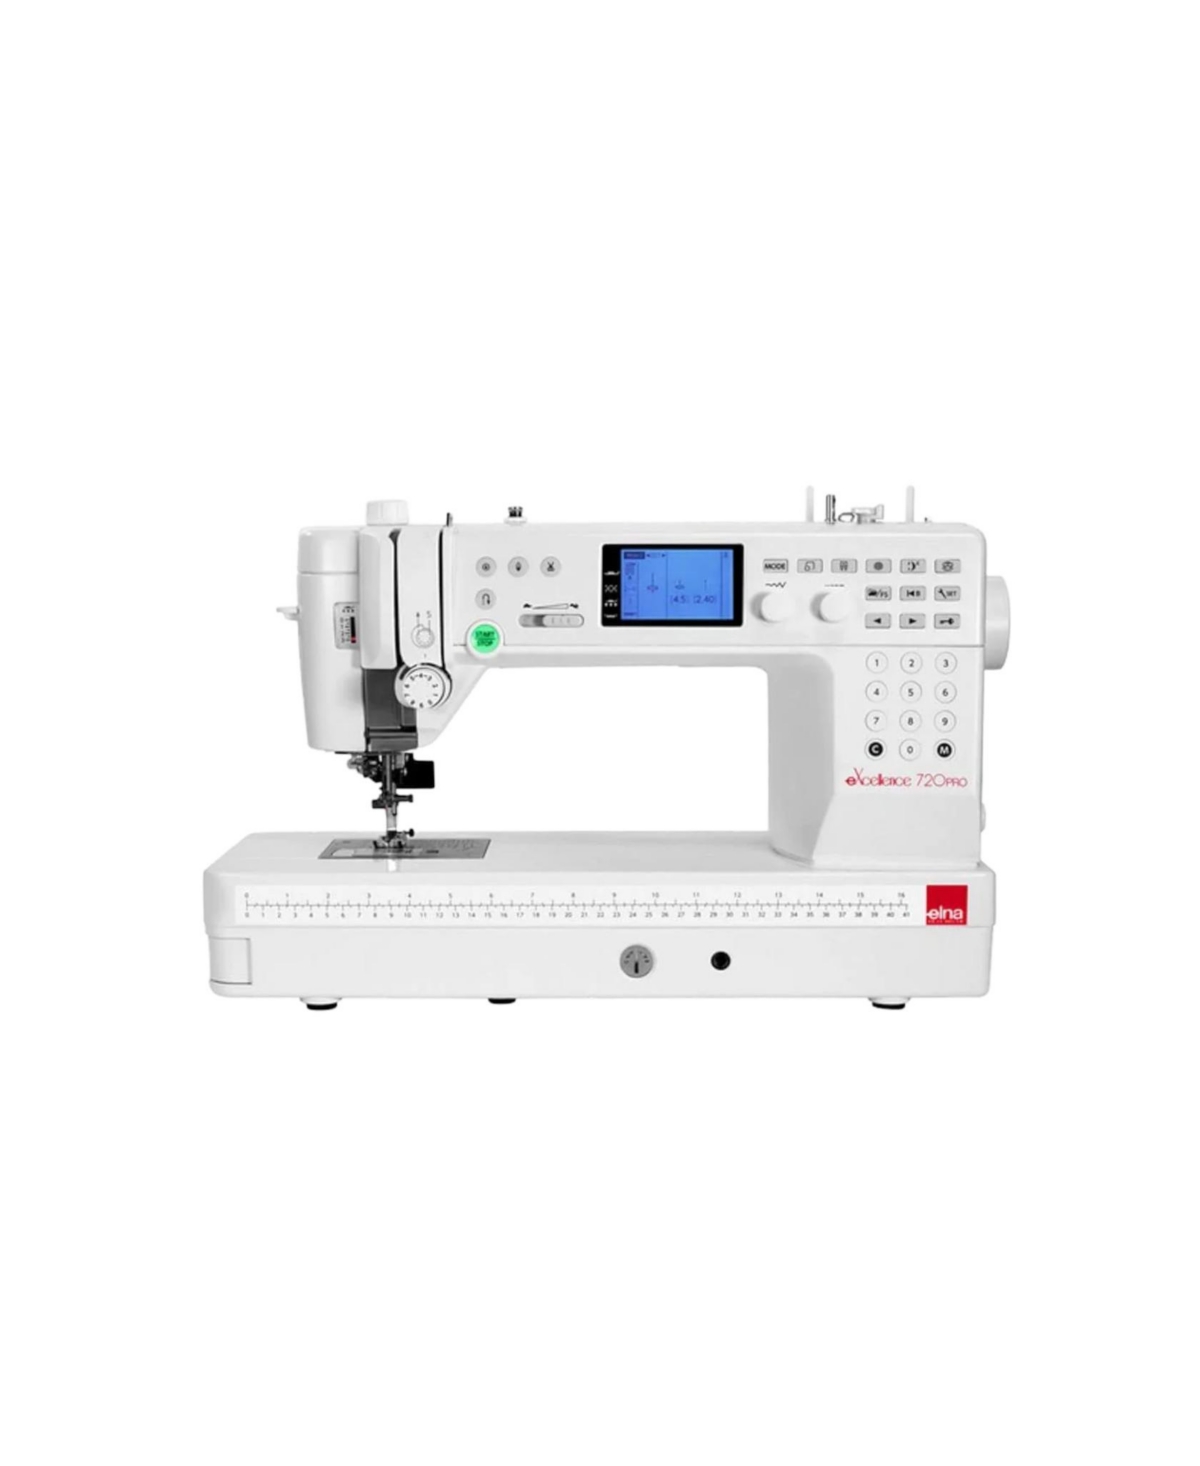 eXcellence 720 Pro Sewing and Quilting Machine - White